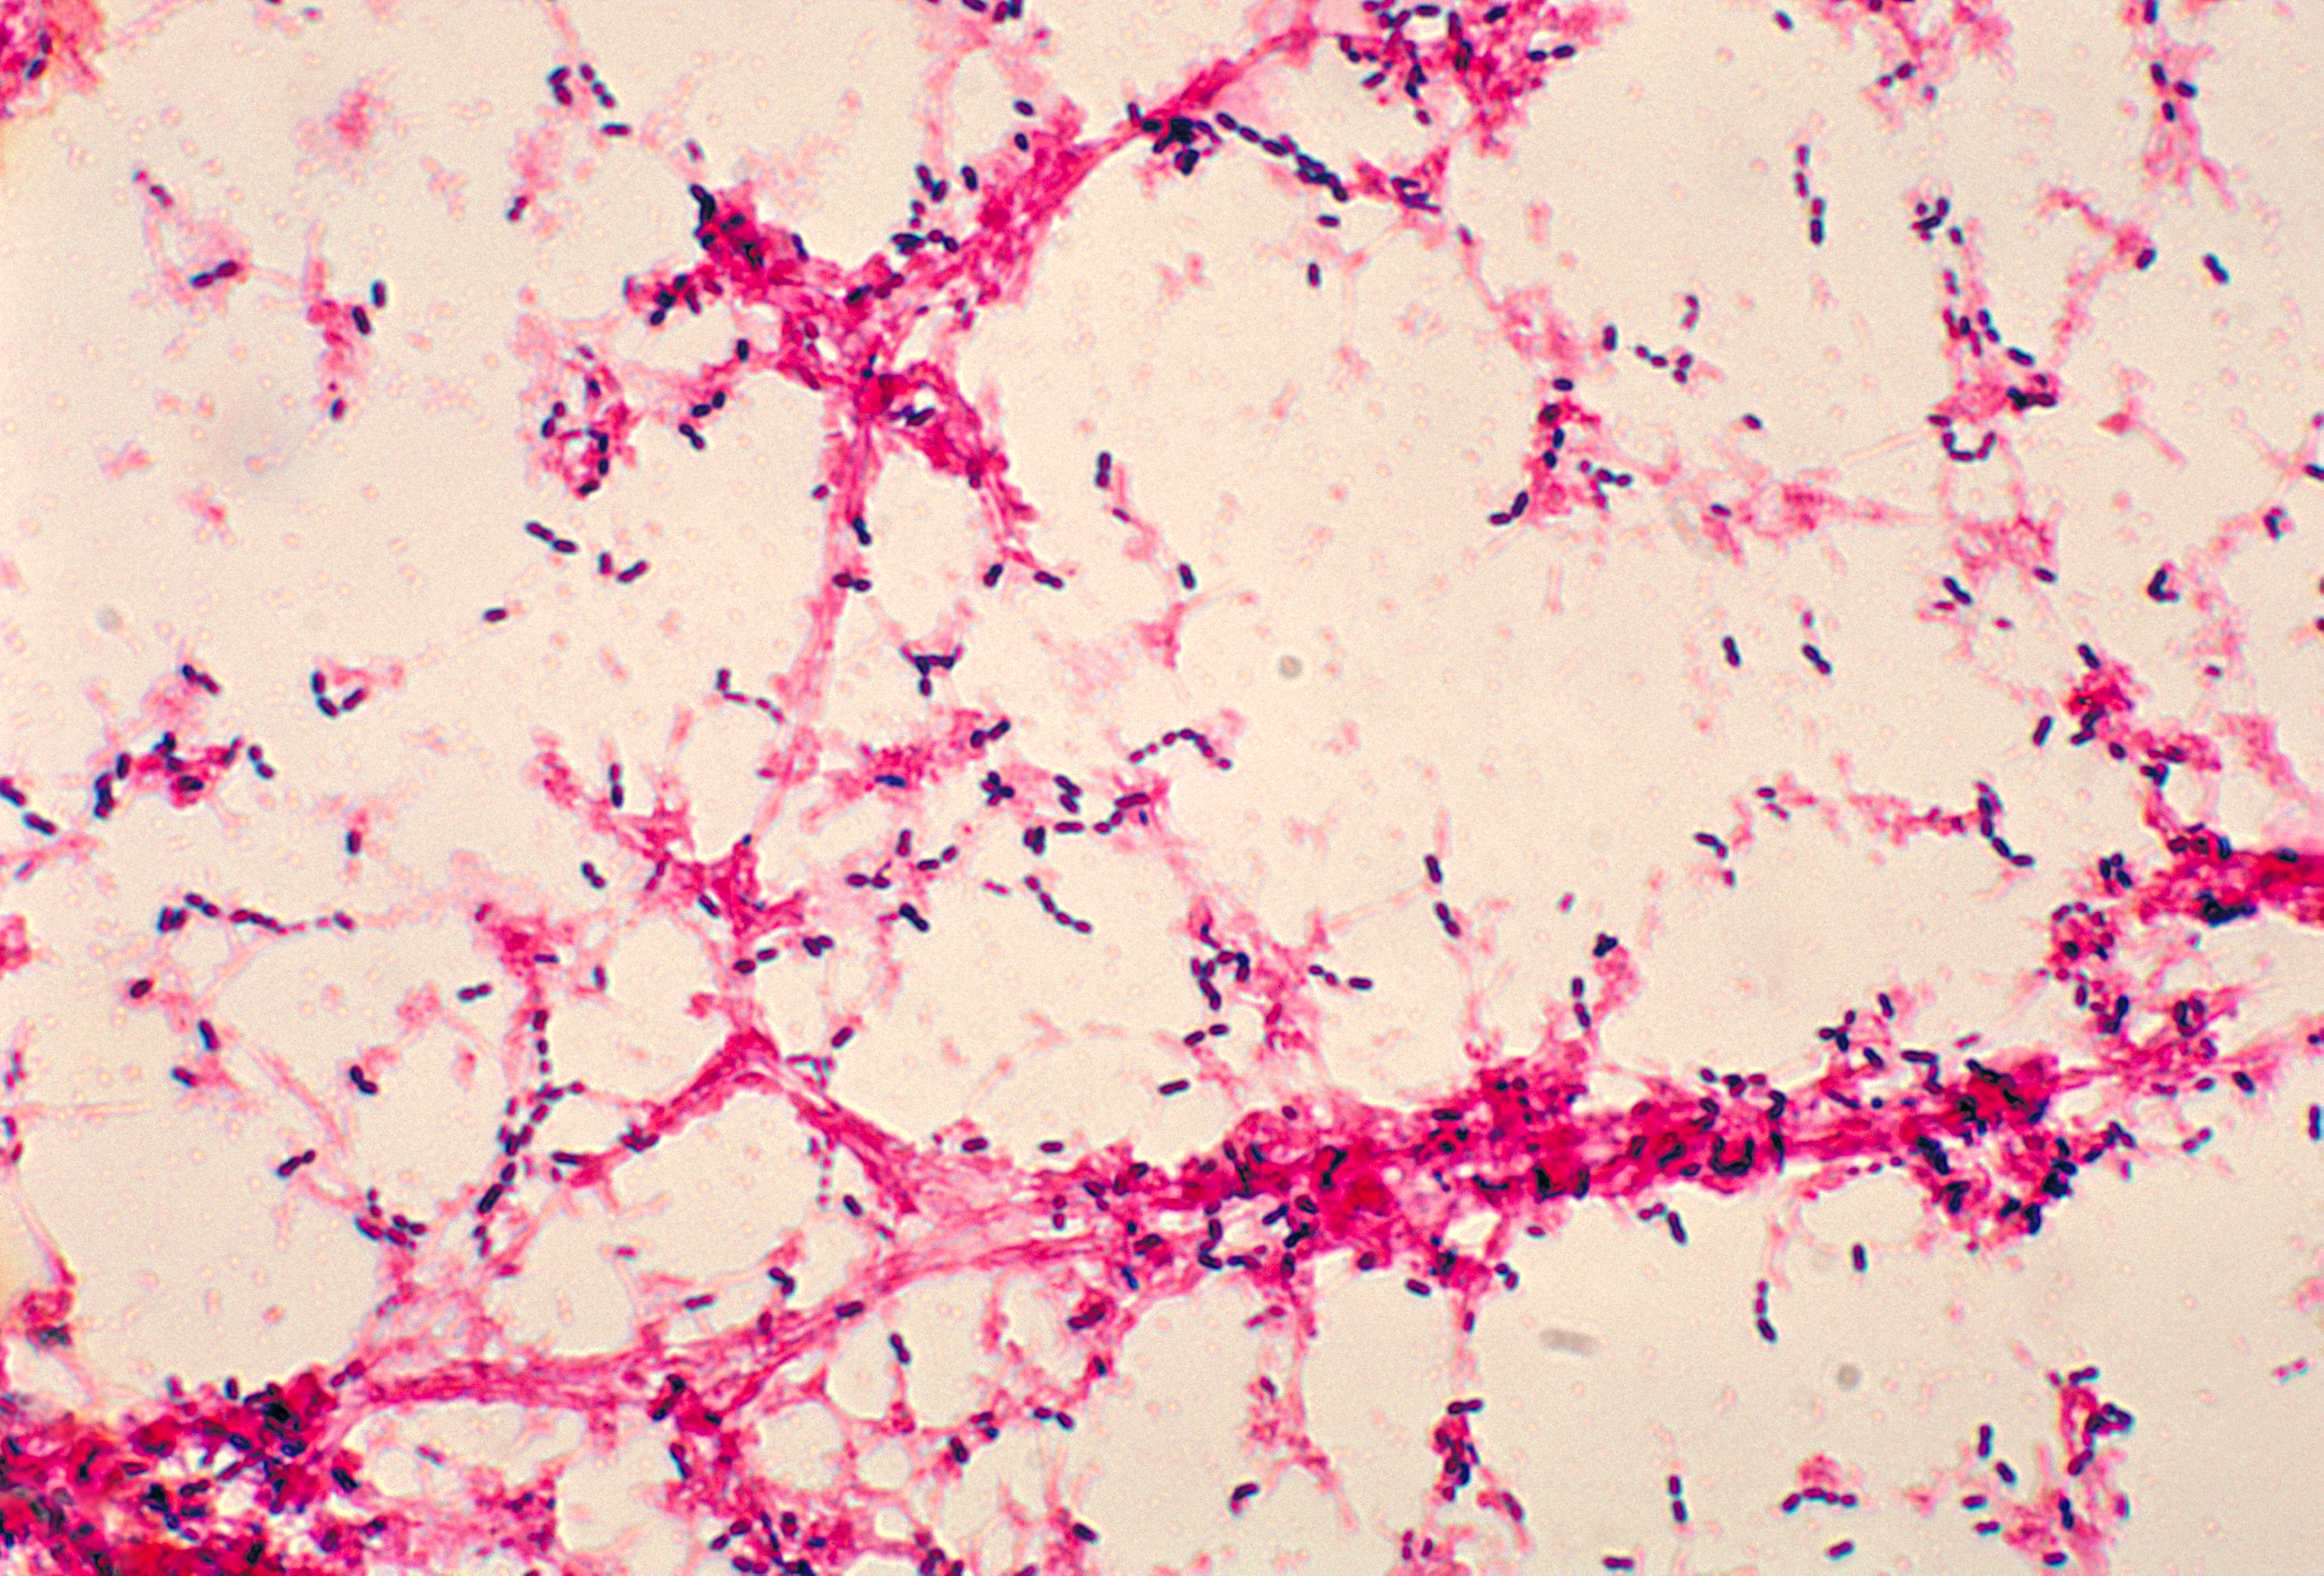 Photomicrograph of Streptococcus pneumoniae bacteria grown from a blood culture. Source: CDC Public Health Image Library